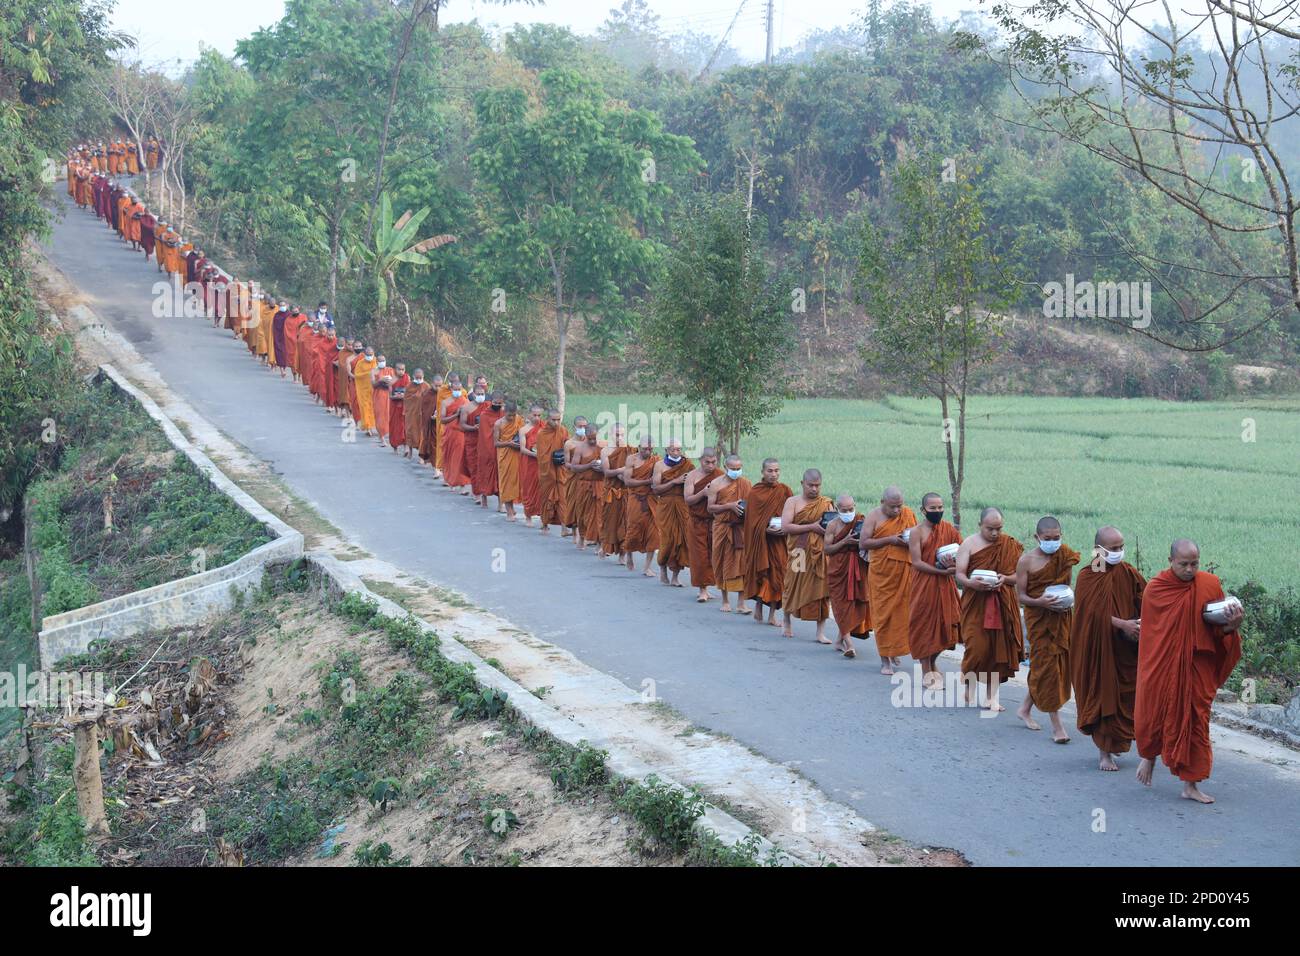 Theravada Buddhism: They are going in the early morning, Khagrachari, Bangladesh. Stock Photo